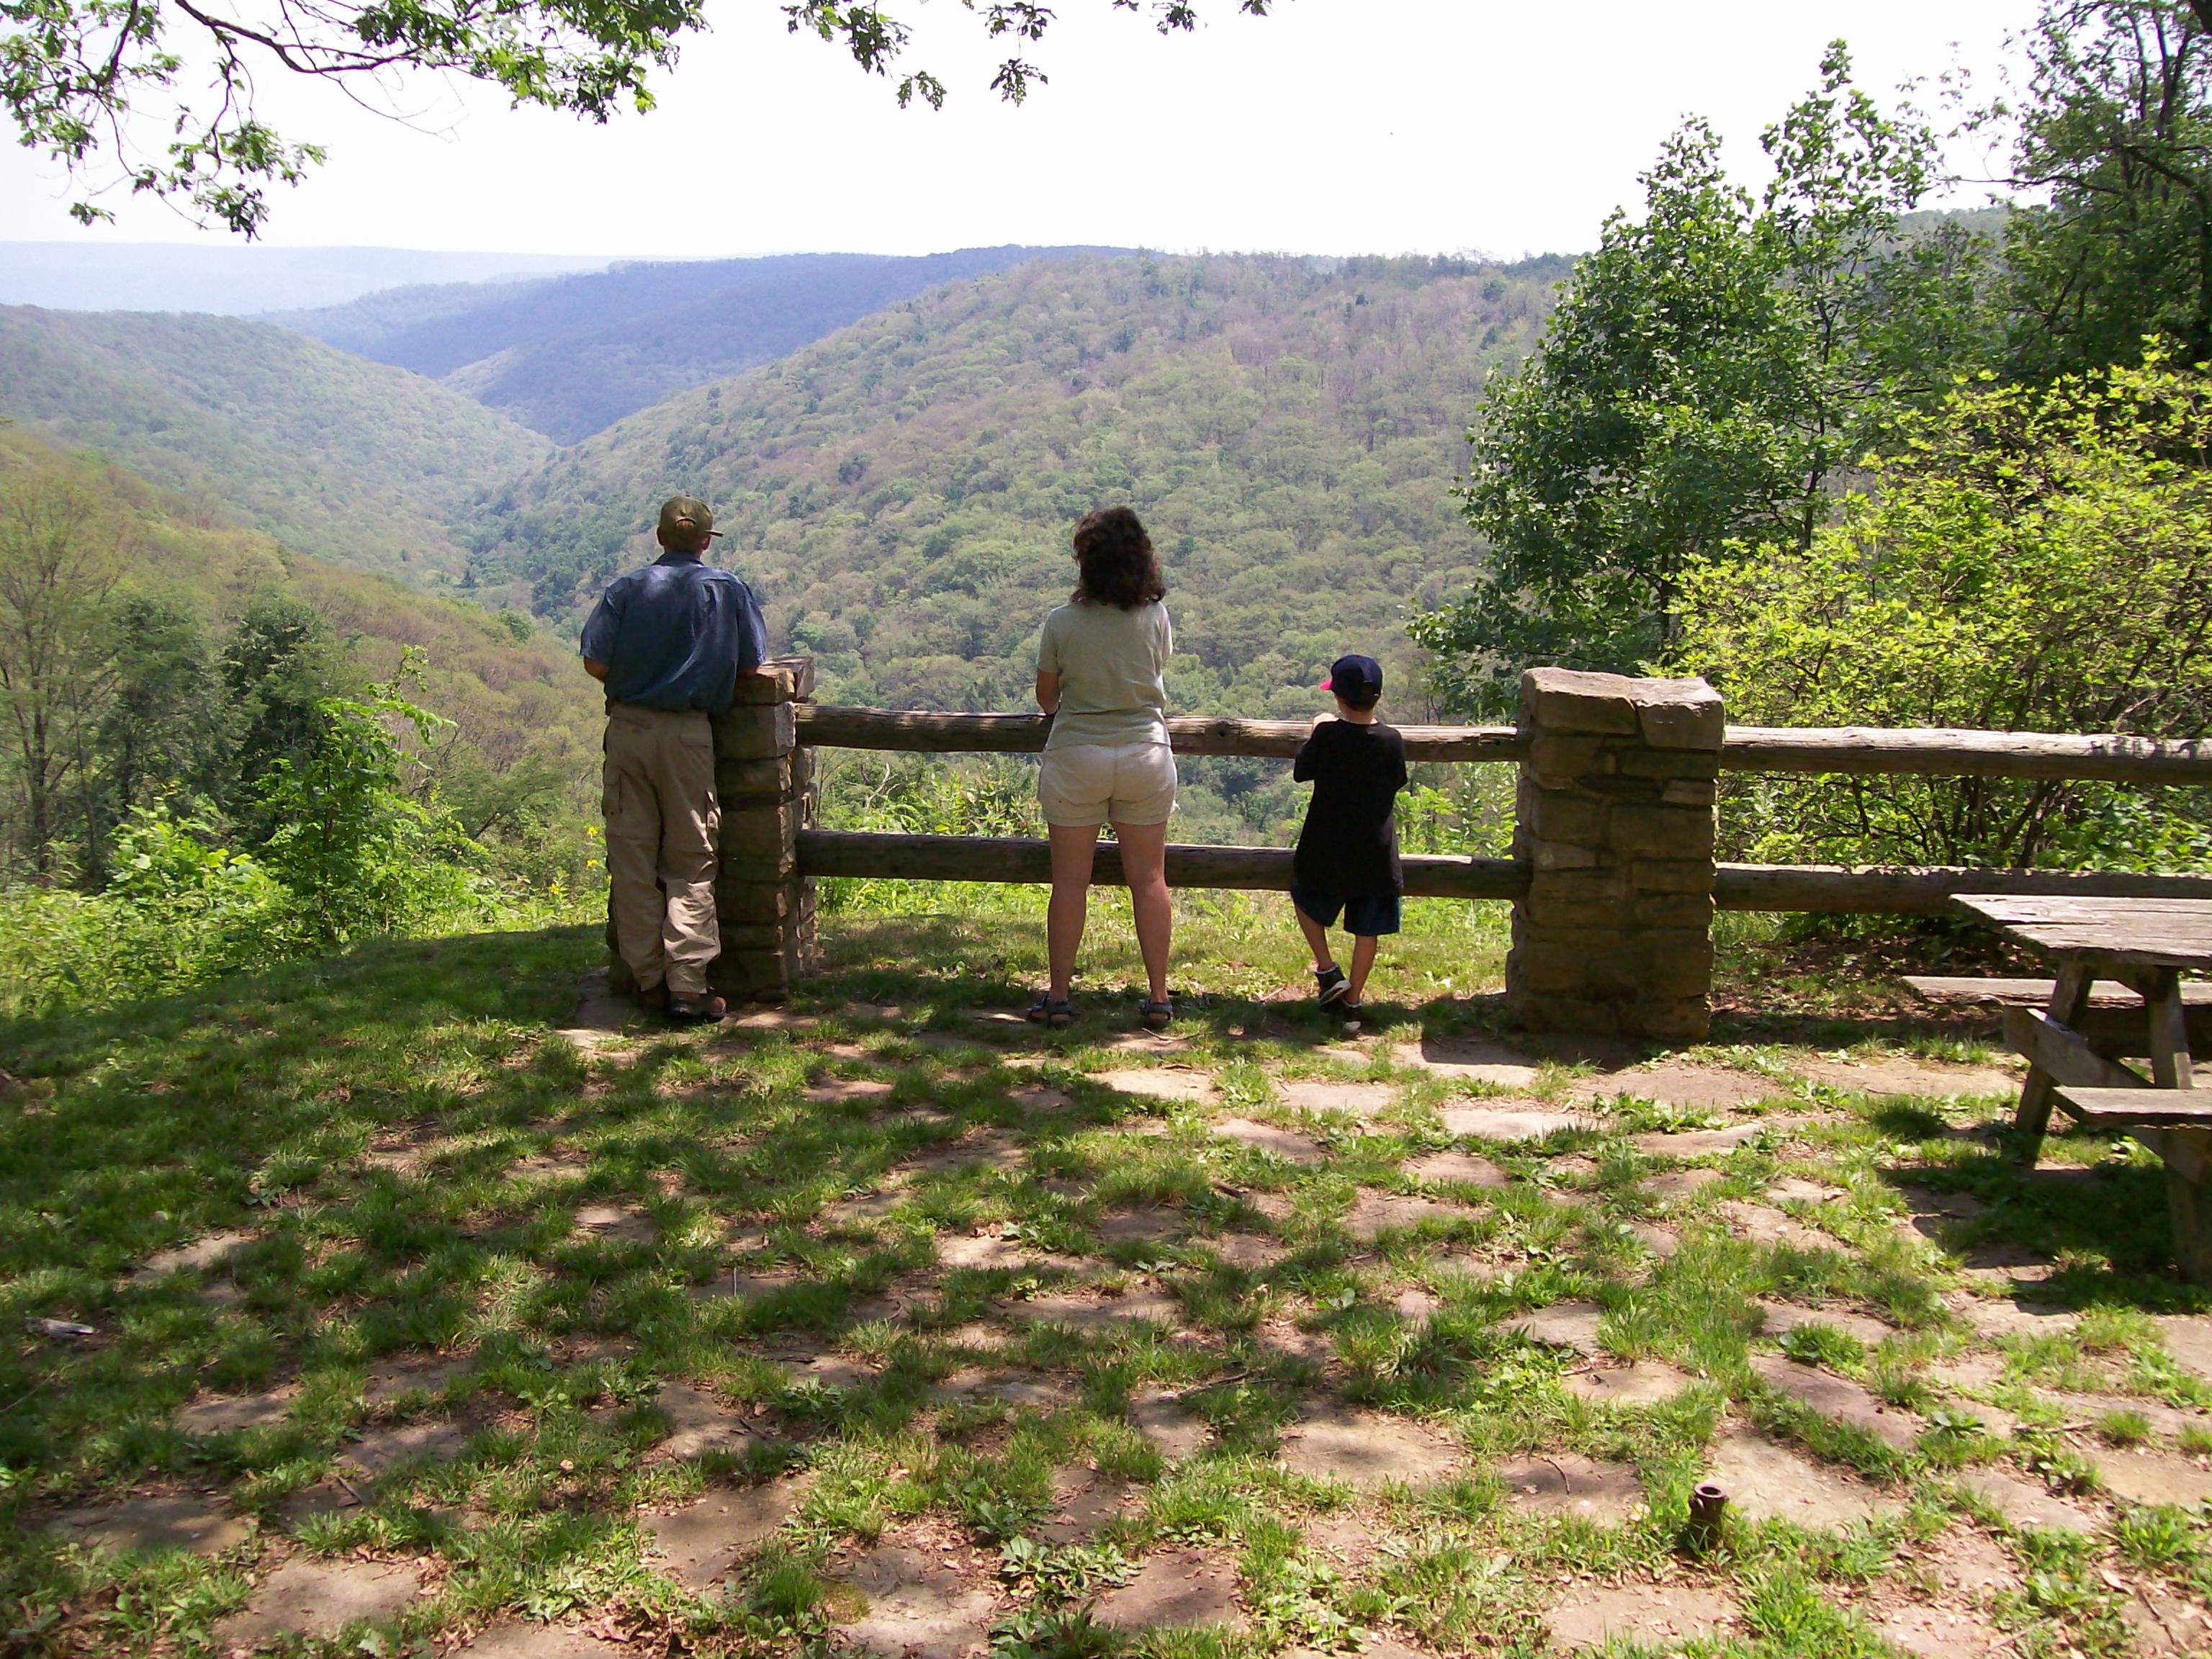 A man, woman and child stand overlooking a valley of mountains and trees on a sunny summer day.